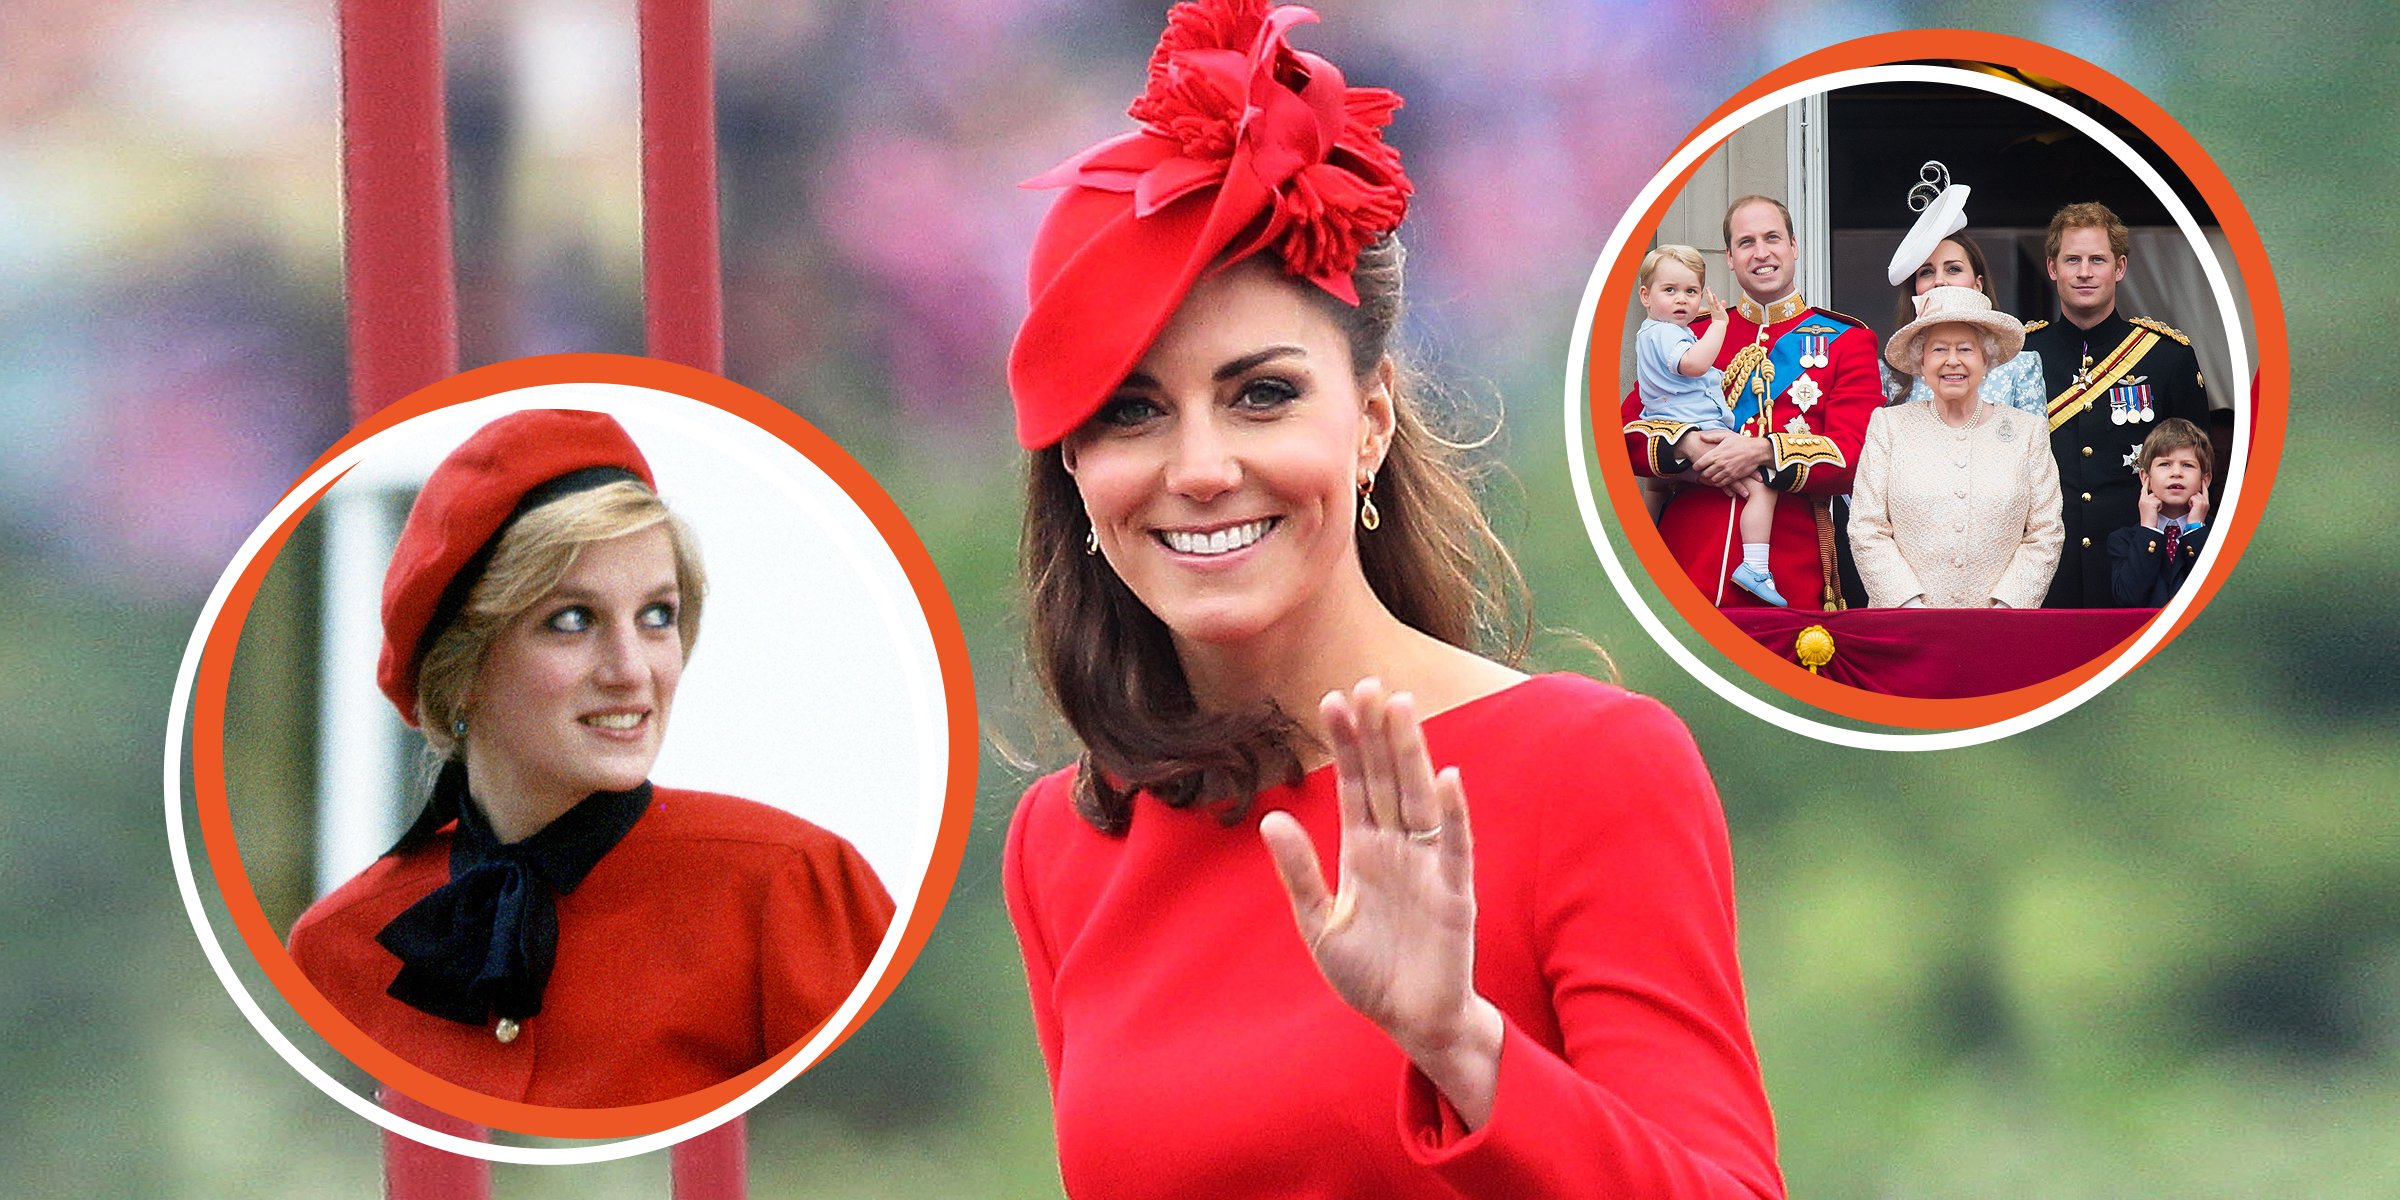 Lady Diana | Duchess Kate  | Part of the Royal Familie | Source: Getty Images